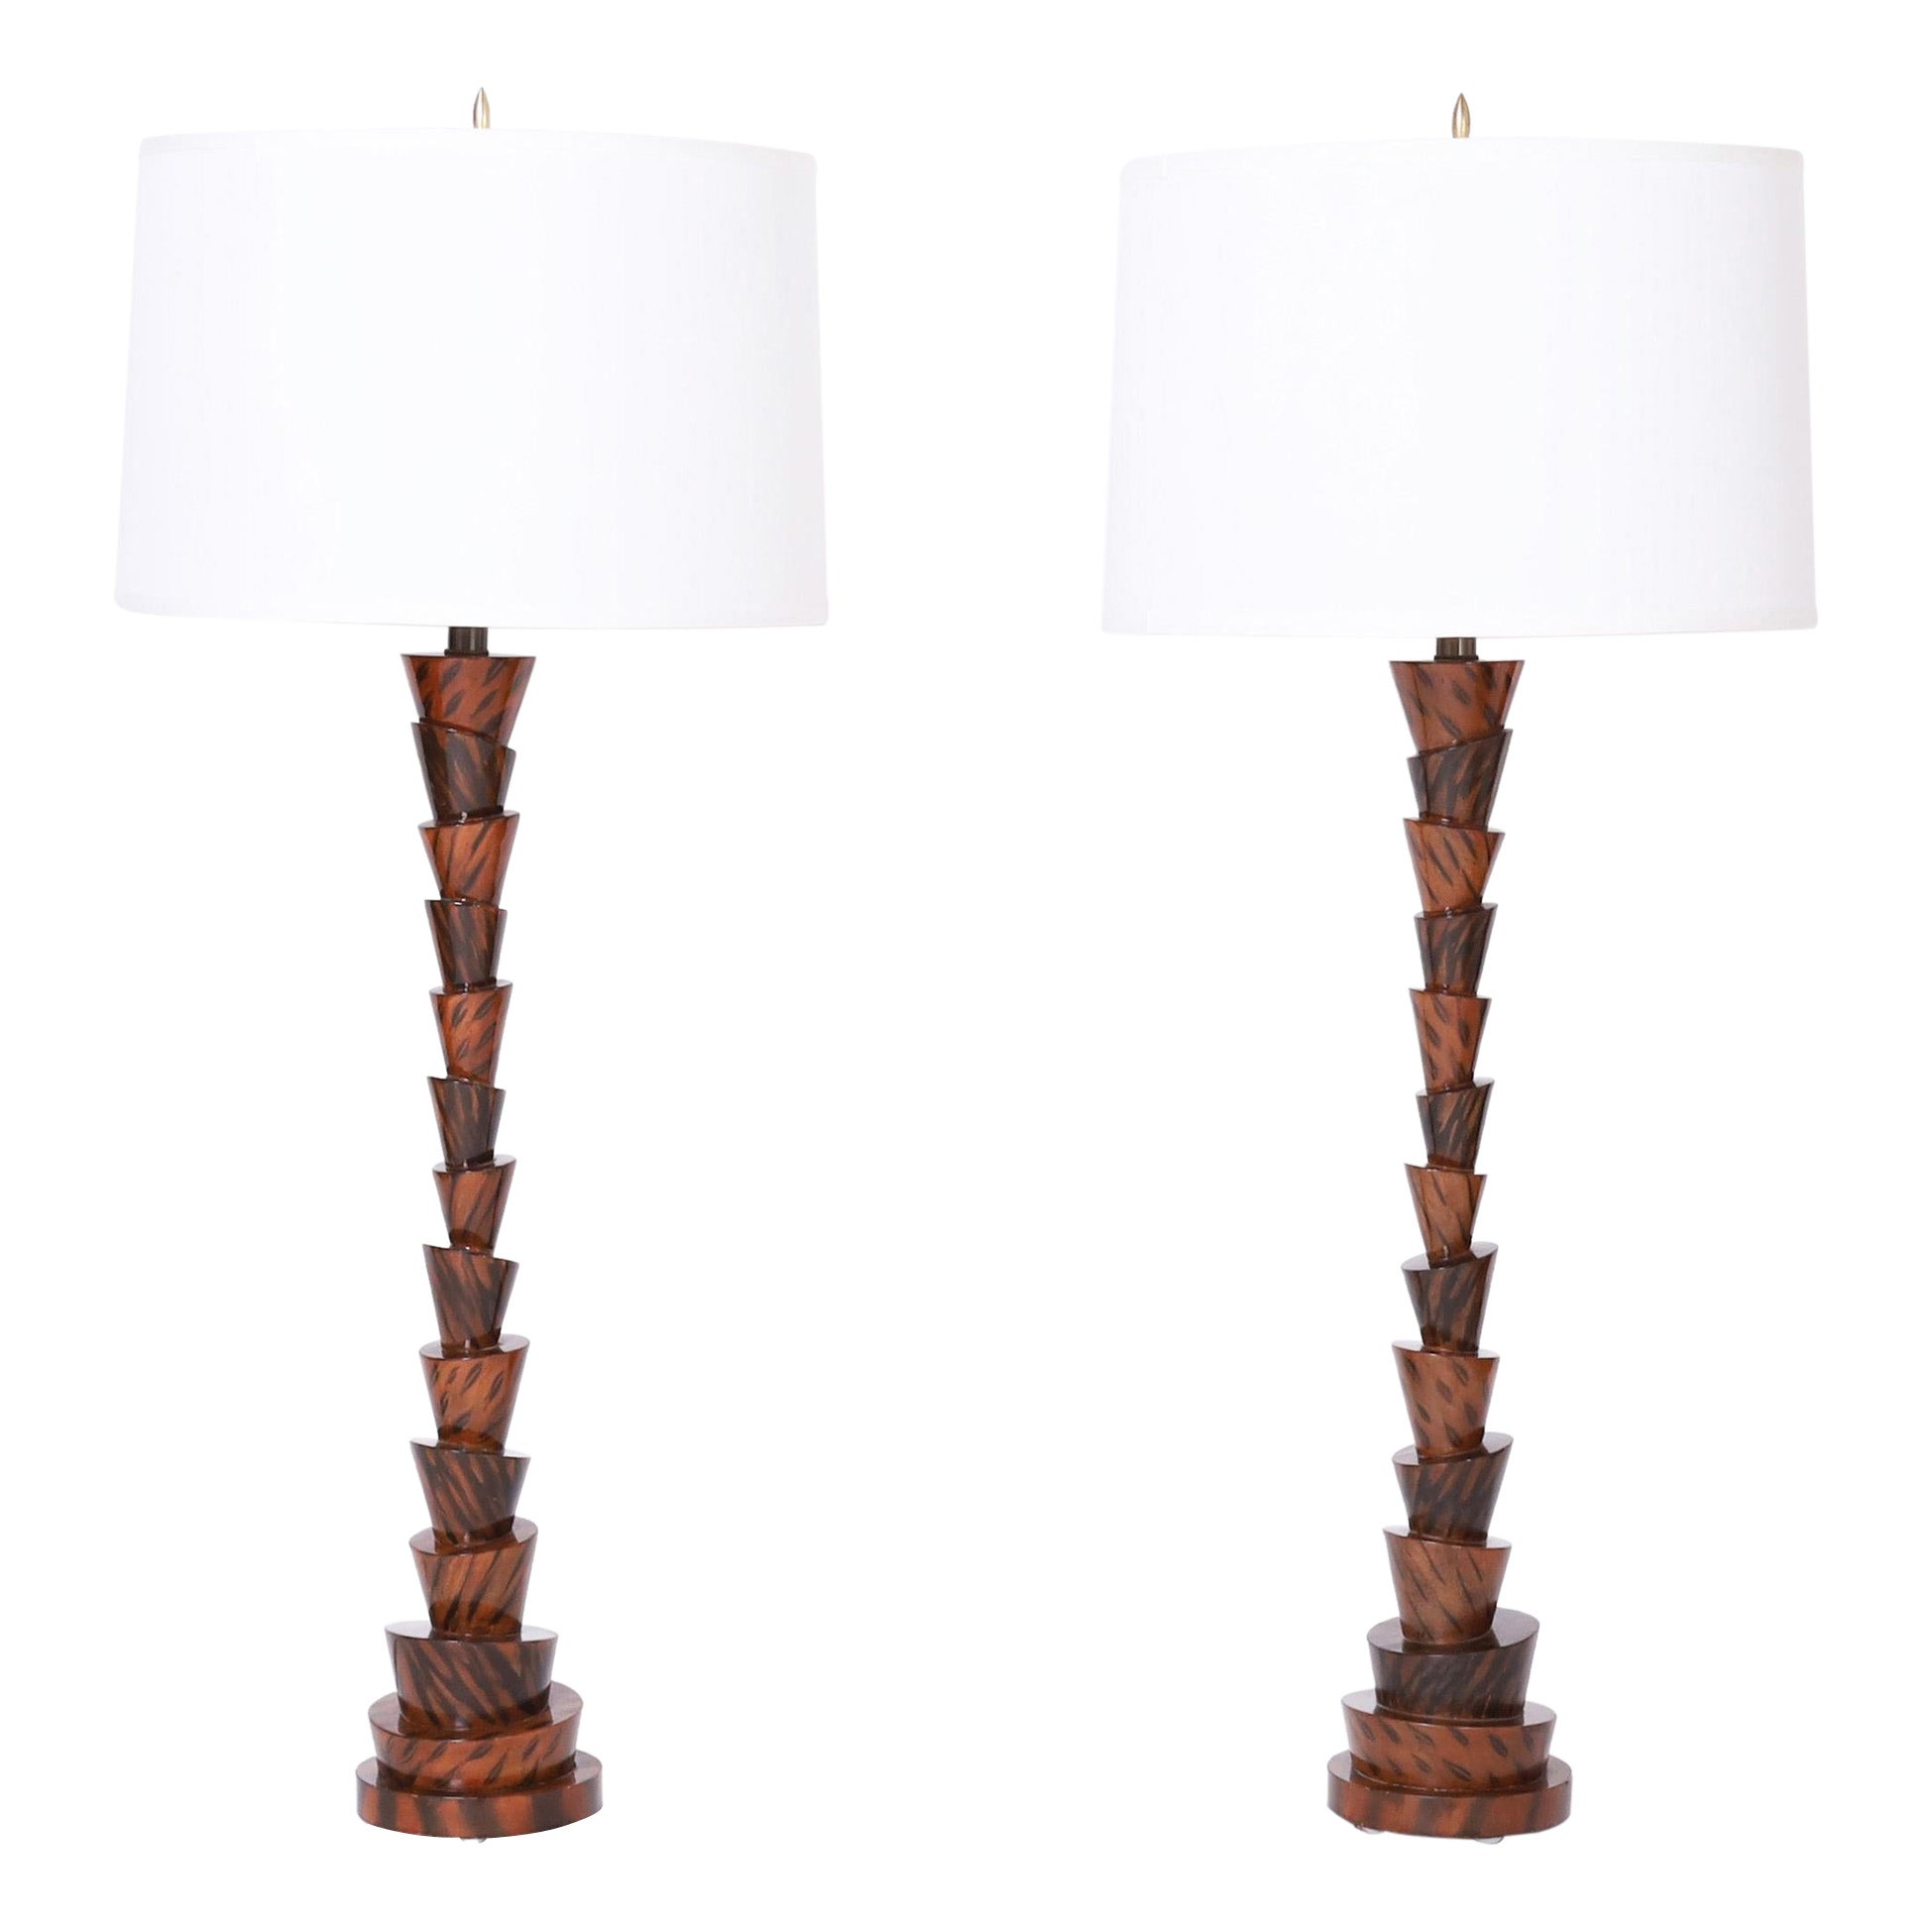 Pair of Tall Post Modern Table Lamps